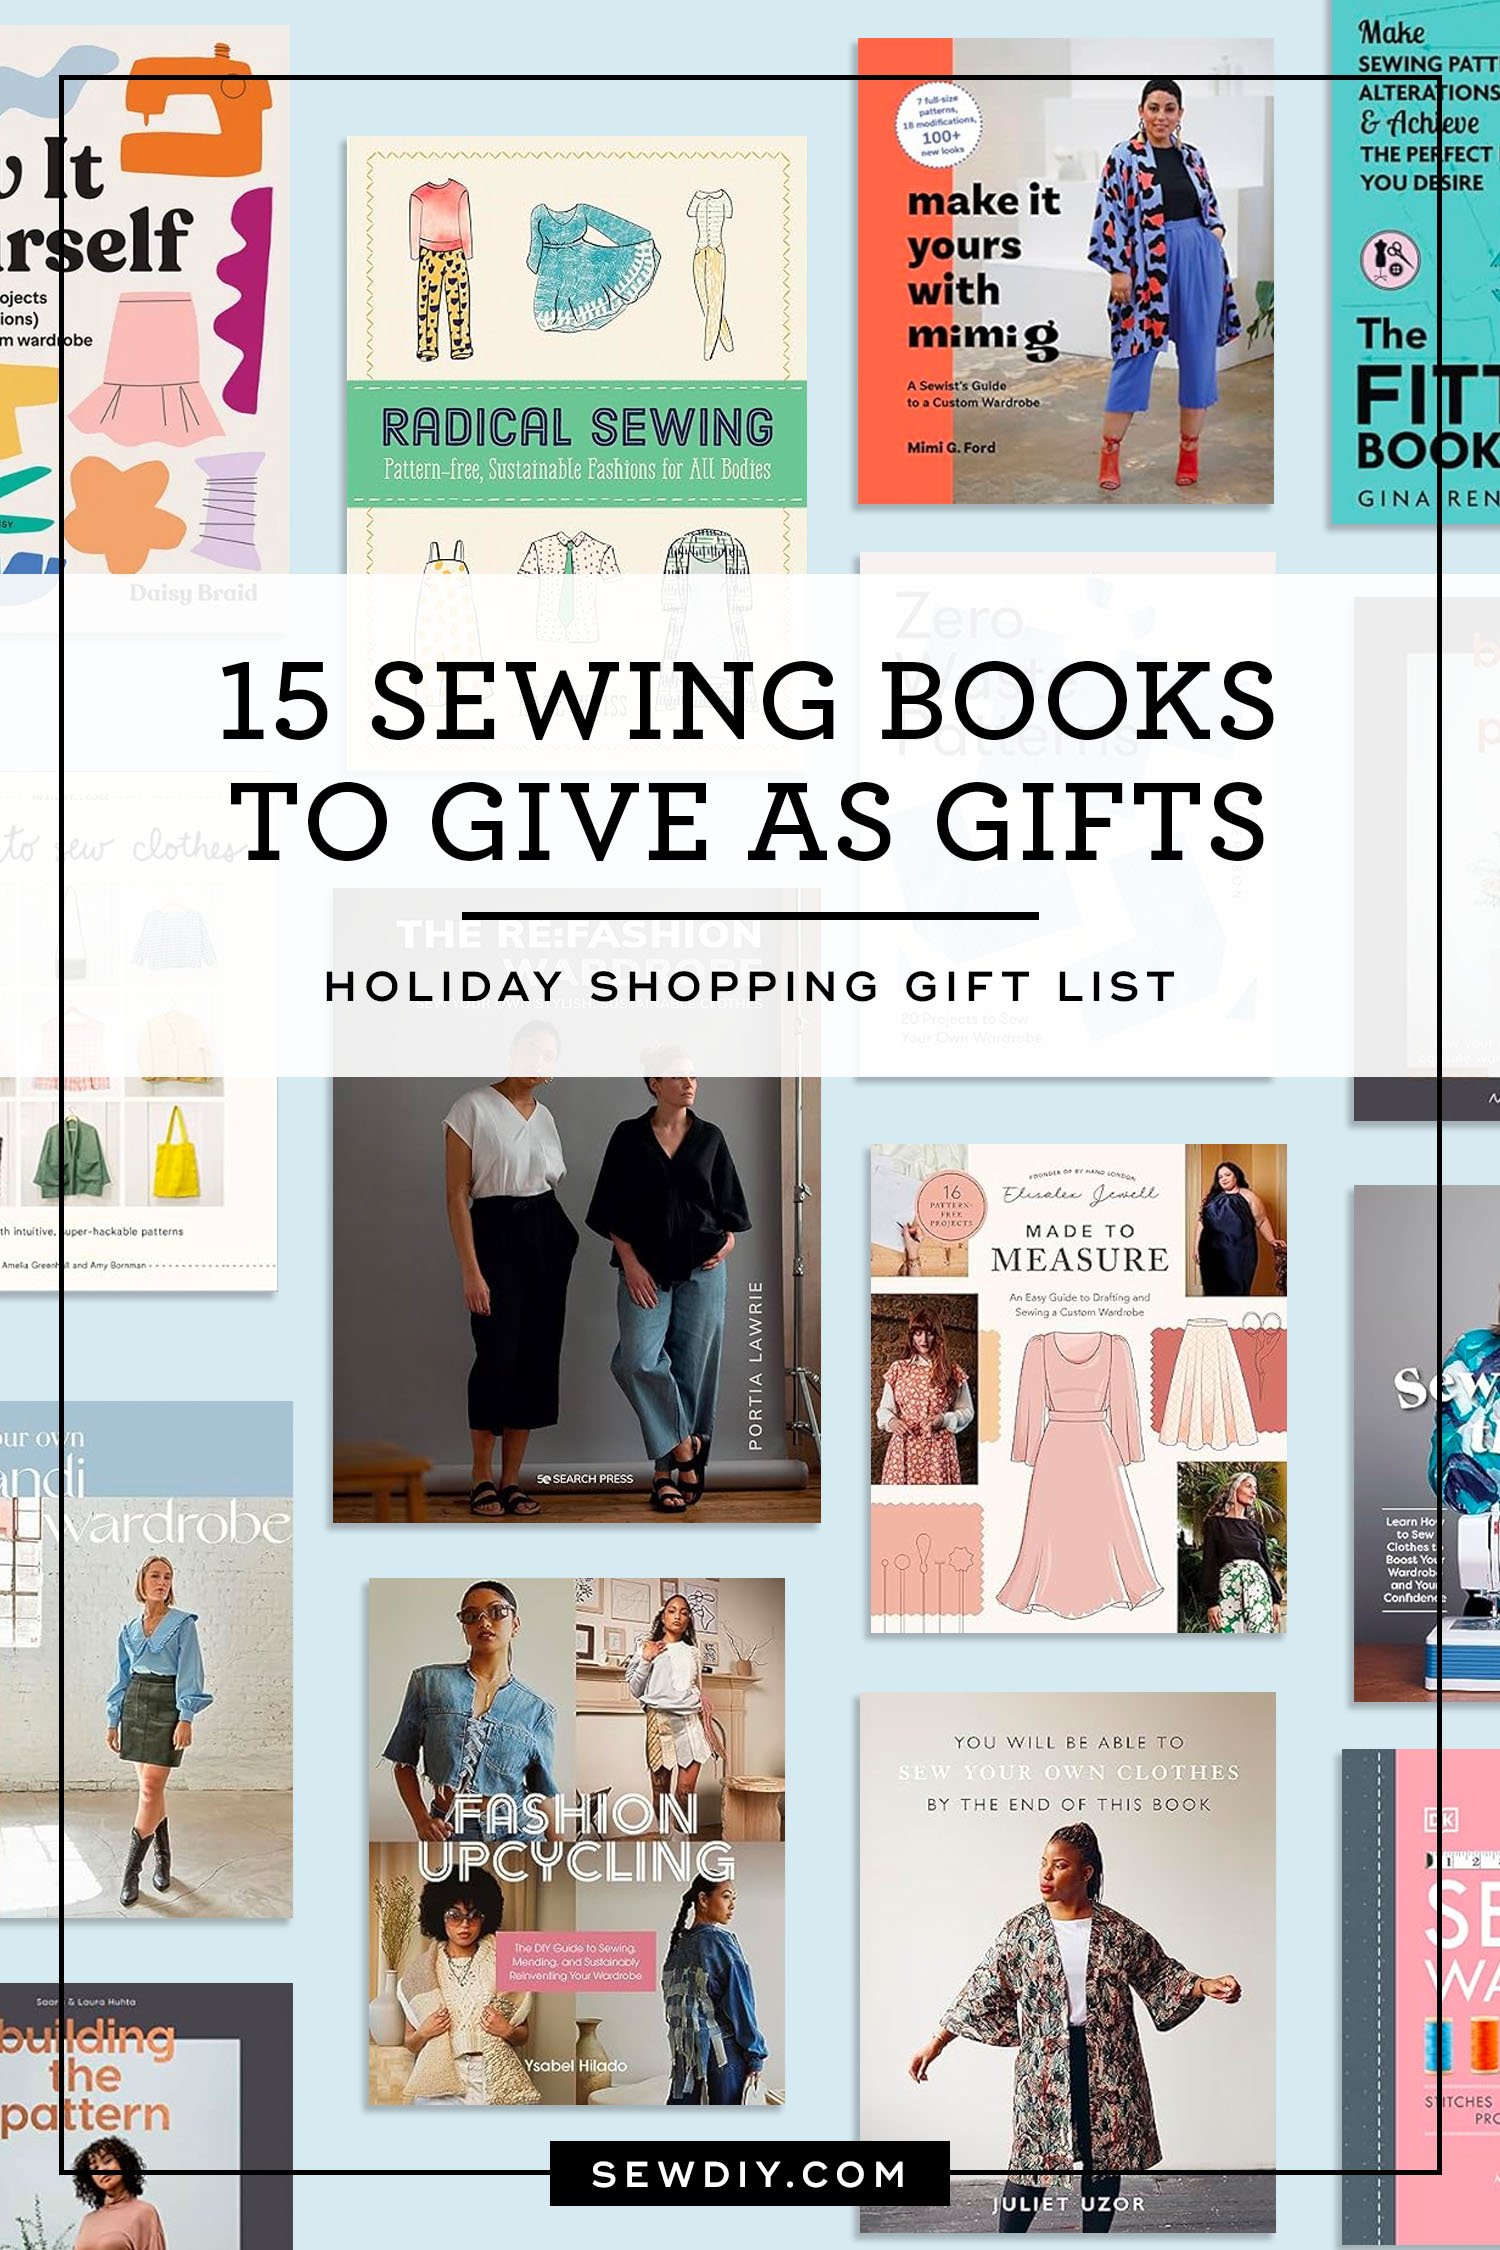 How To Sew Clothes: Learn with Simple, Super-Hackable Sewing